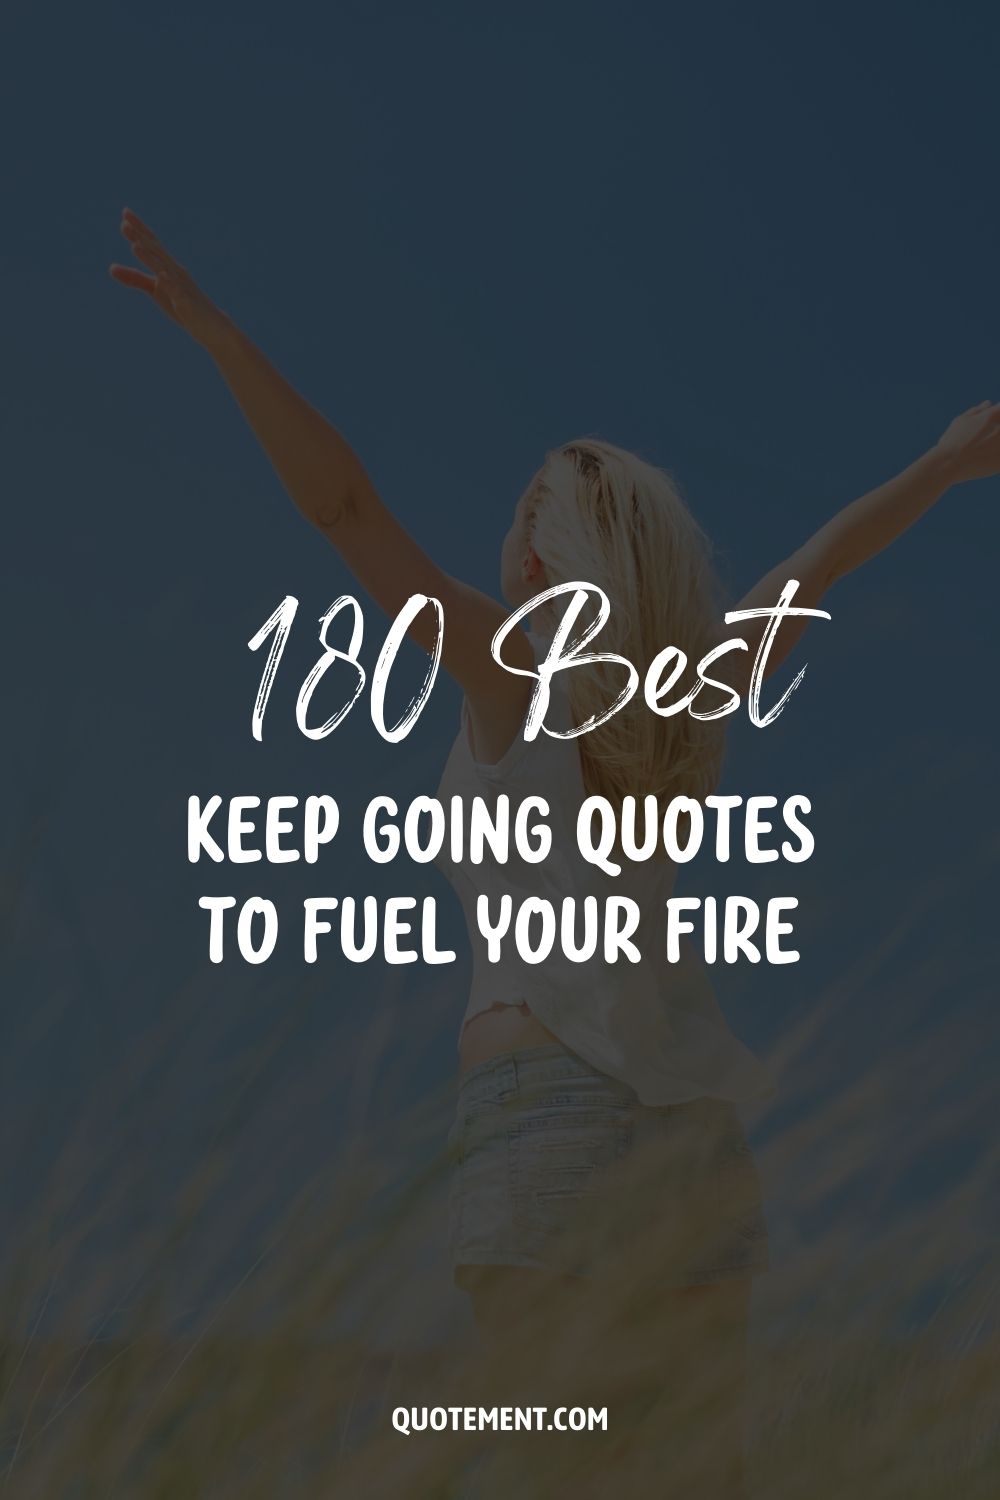 180 Keep Going Quotes To Help You Overcome Life's Trials
